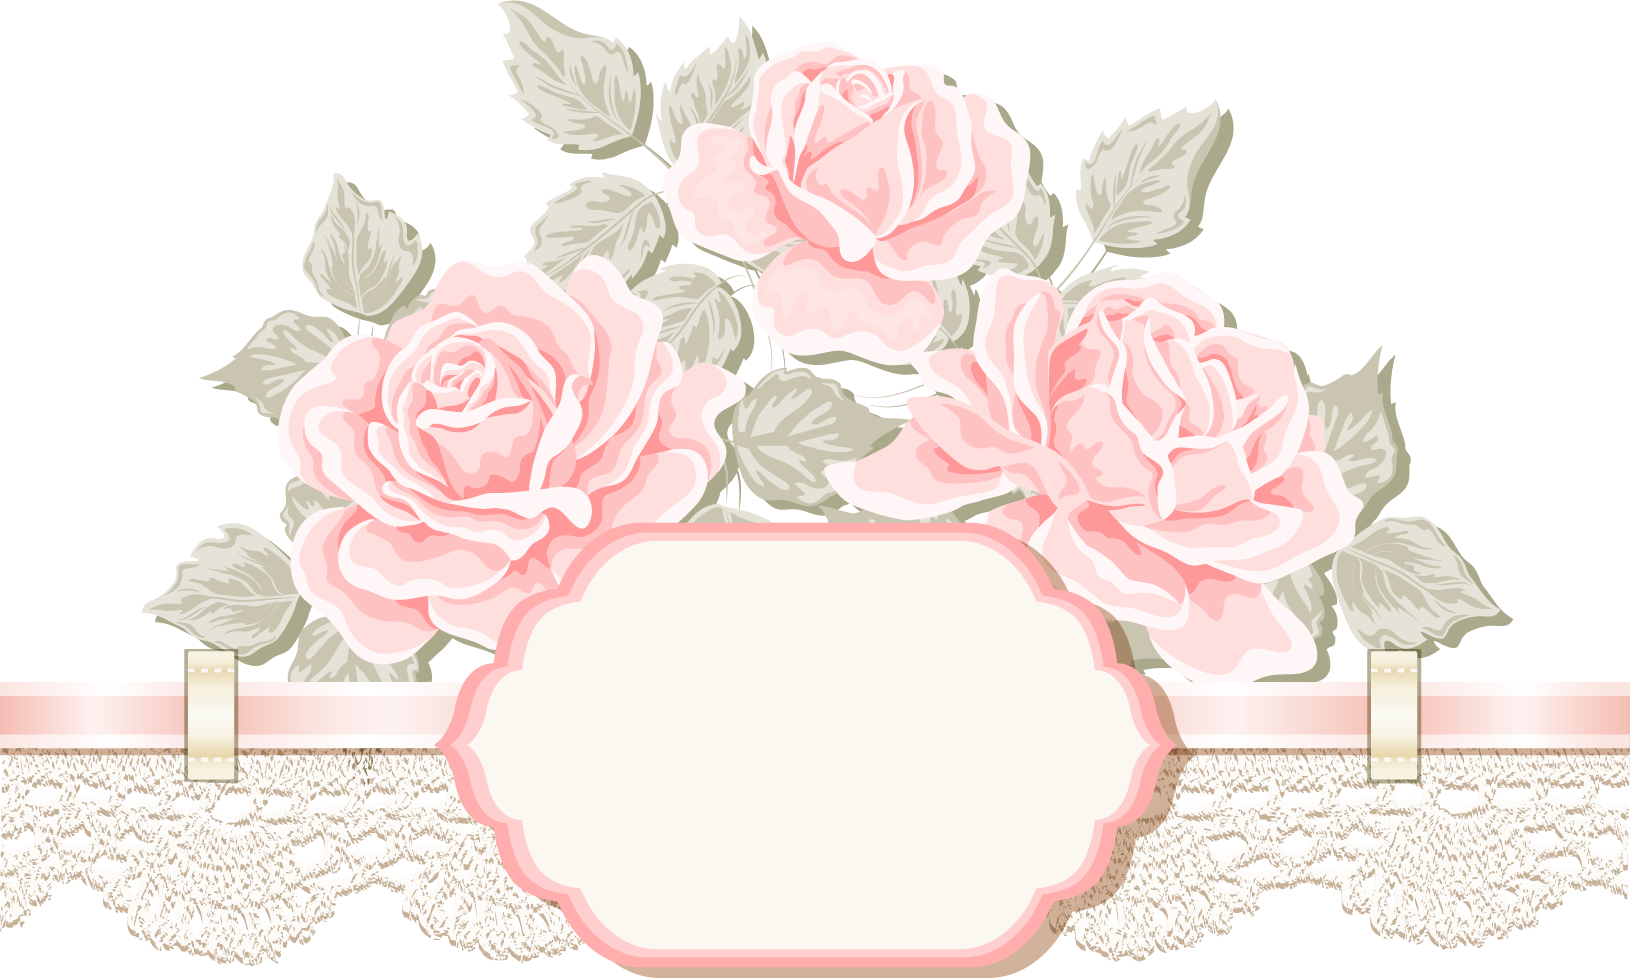 Invitation Marriage Wedding Free Photo PNG Clipart